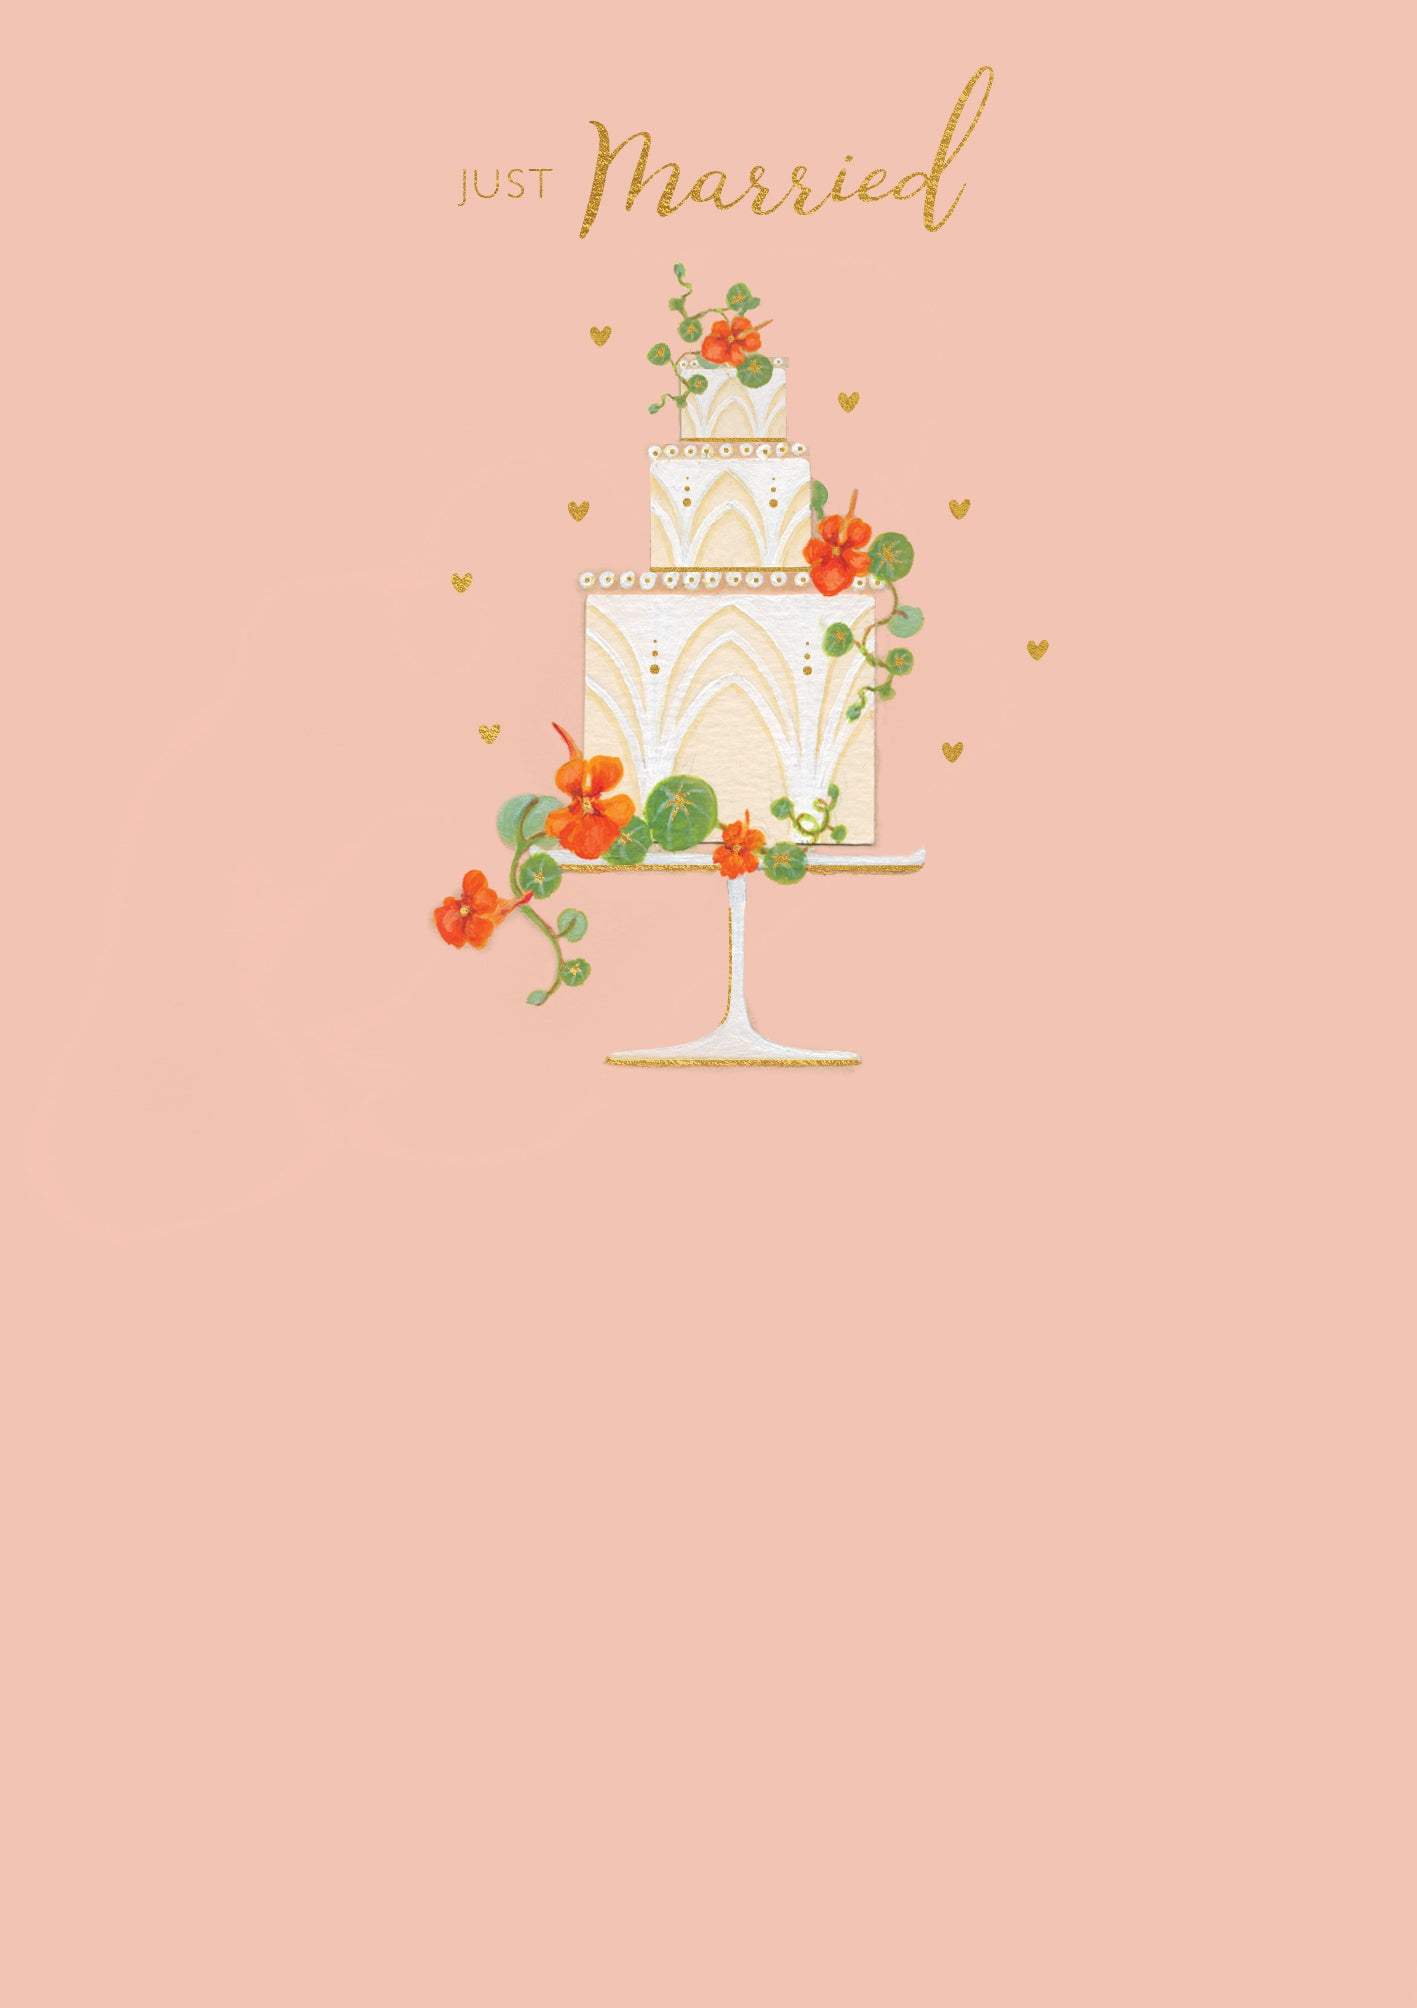 Just Married Celebration Cake Wedding Card from Penny Black